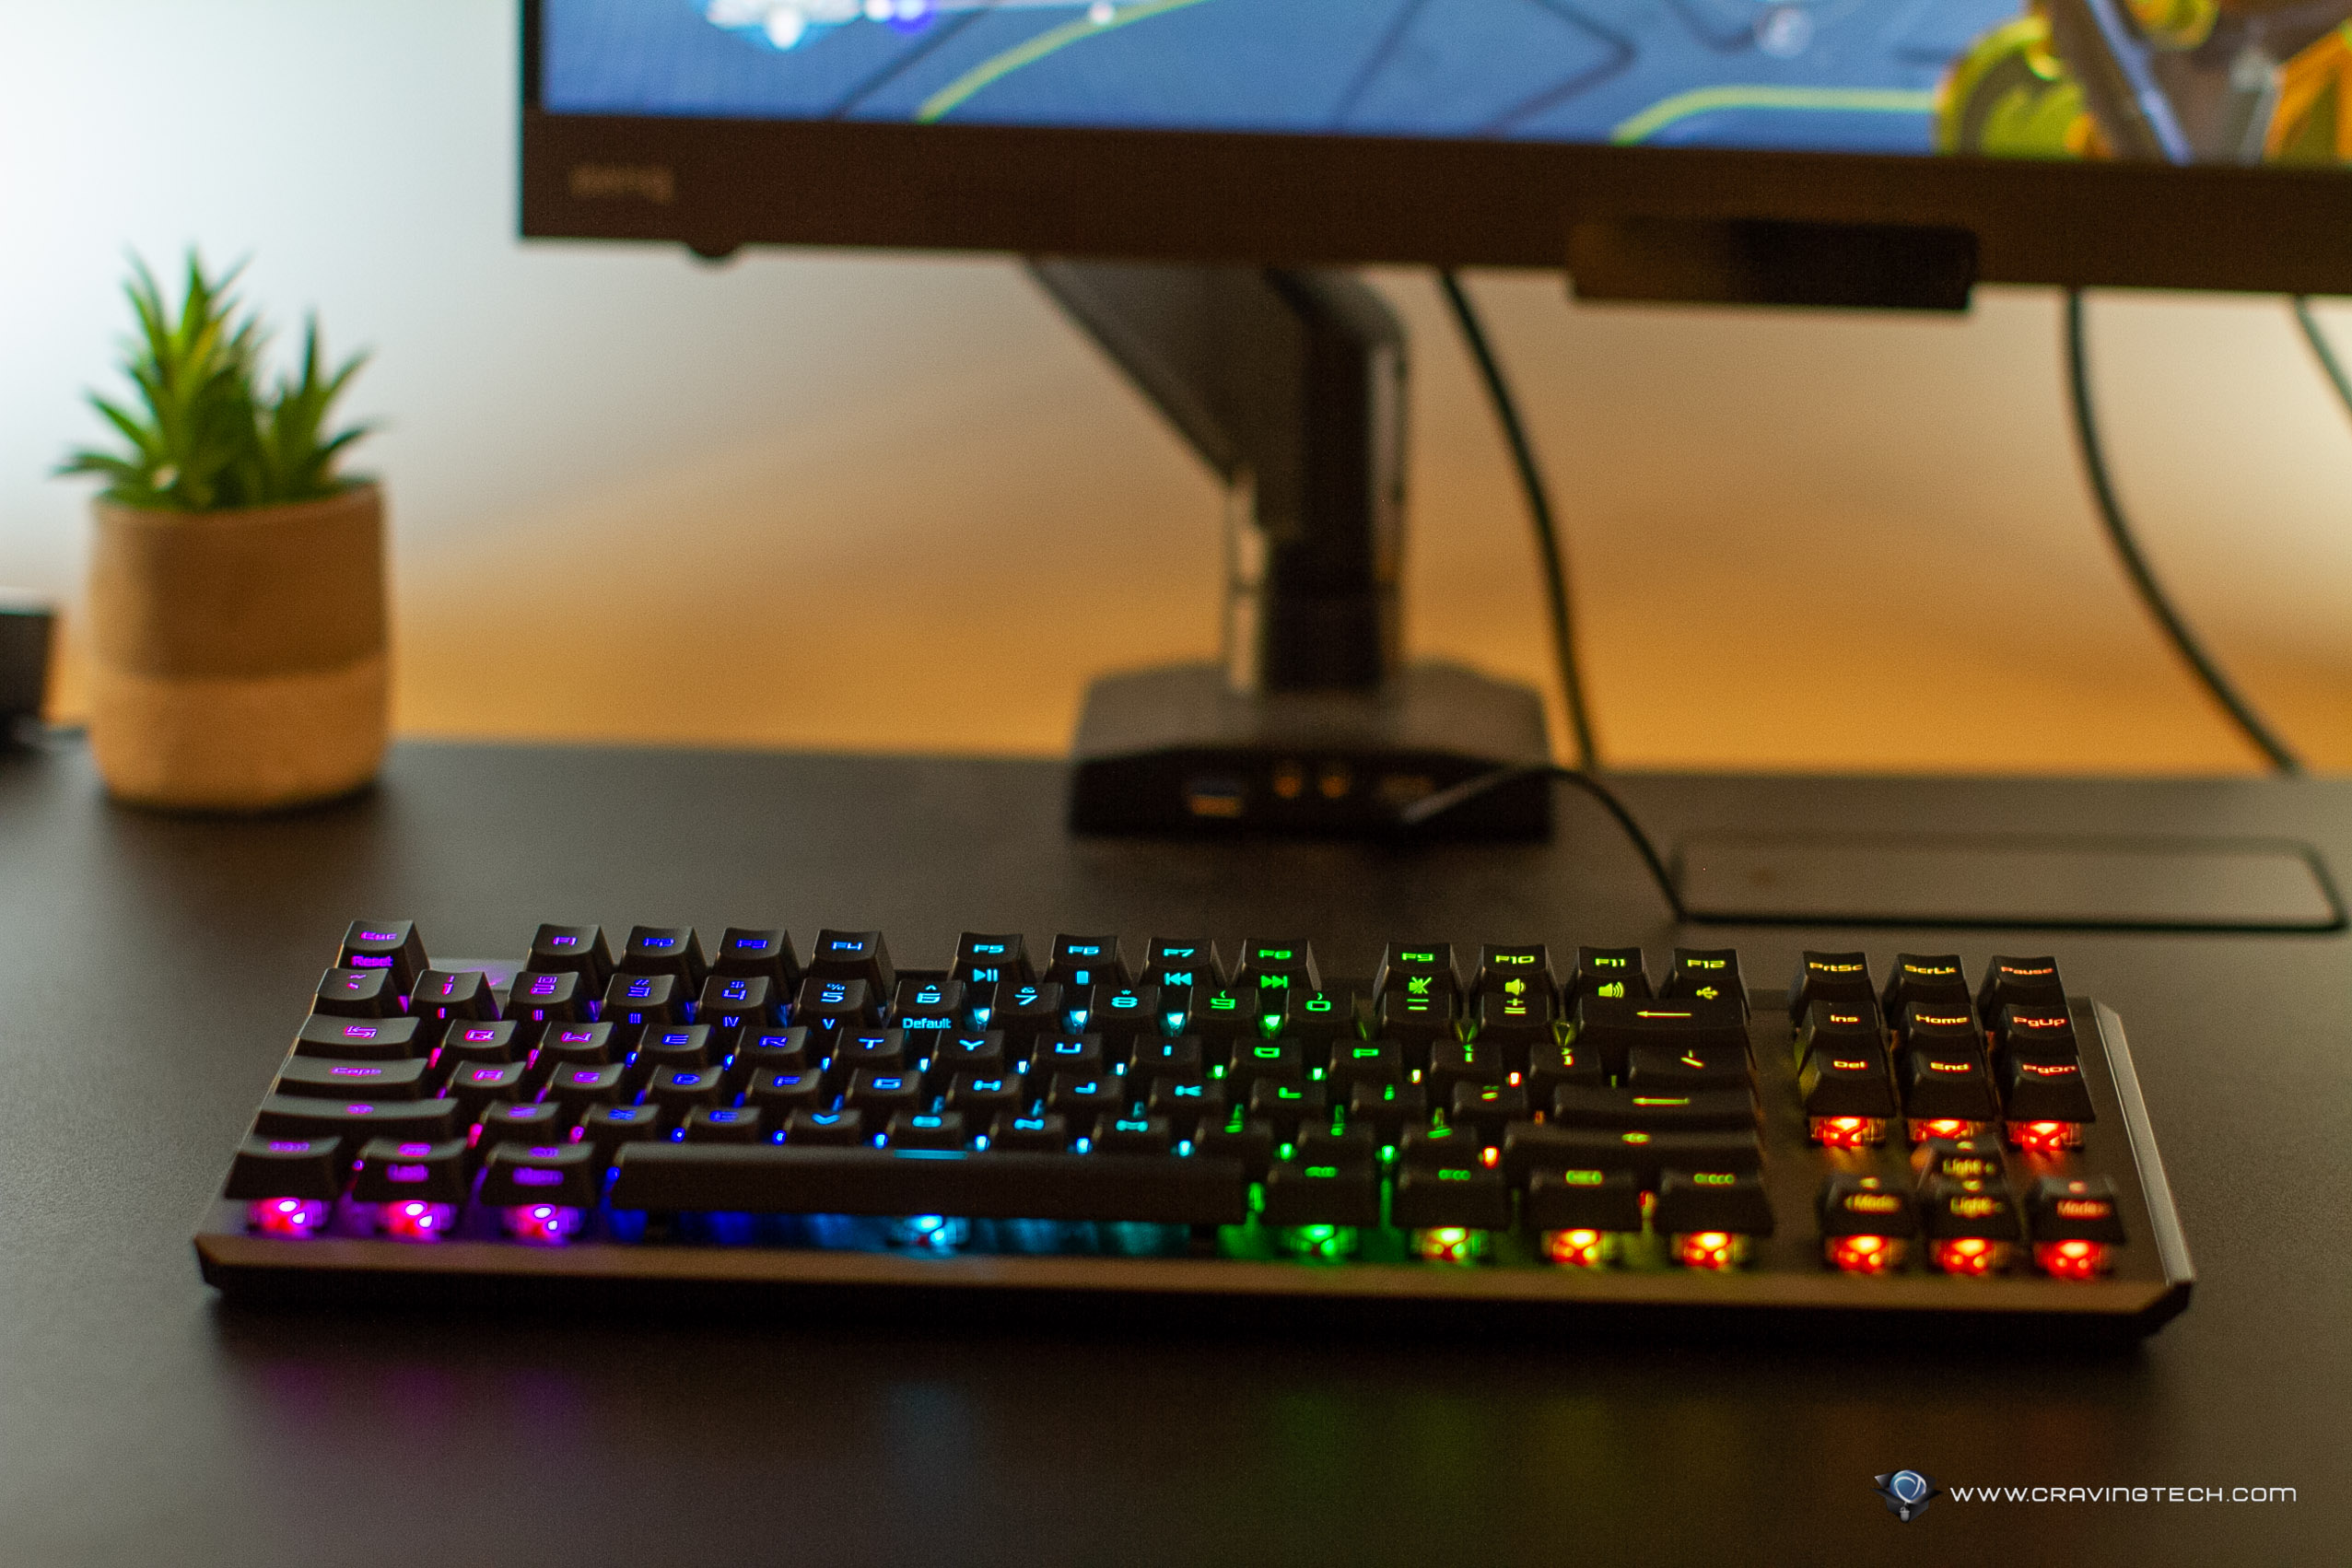 A full-size or TKL keyboard? Why not both? – ROG Claymore II Review